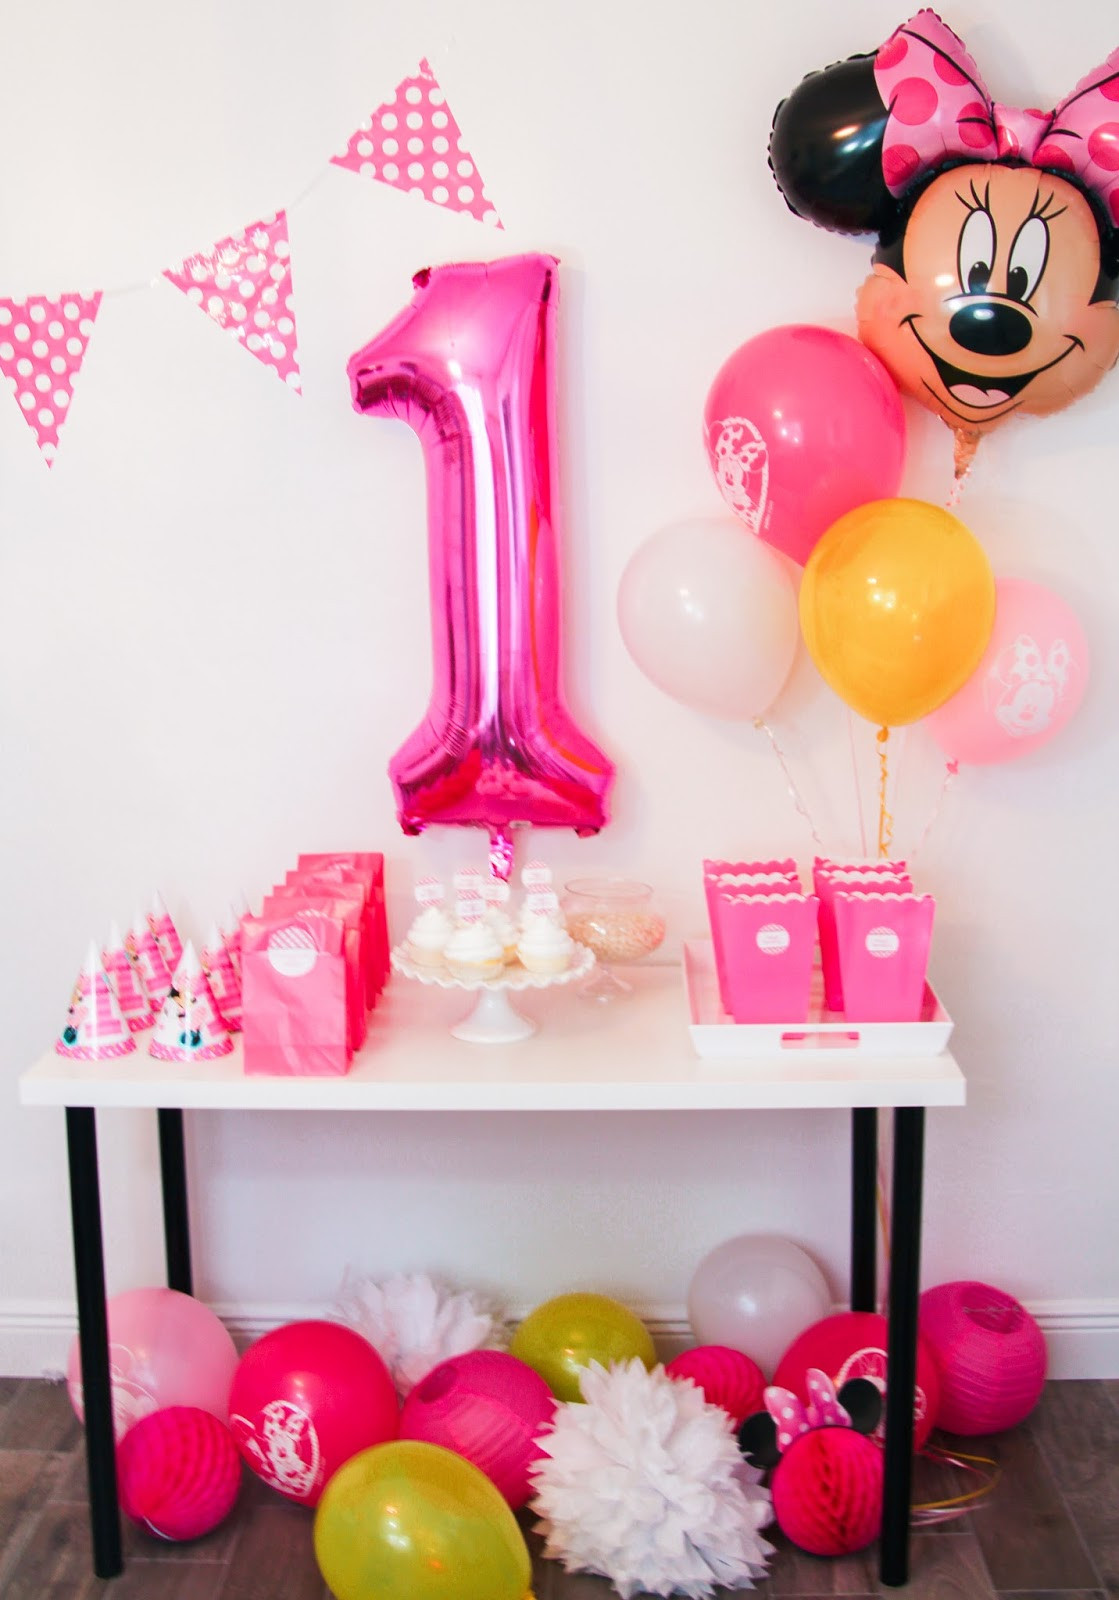 Minnie Mouse 1st Birthday Decorations
 Minnie Mouse First Birthday Party